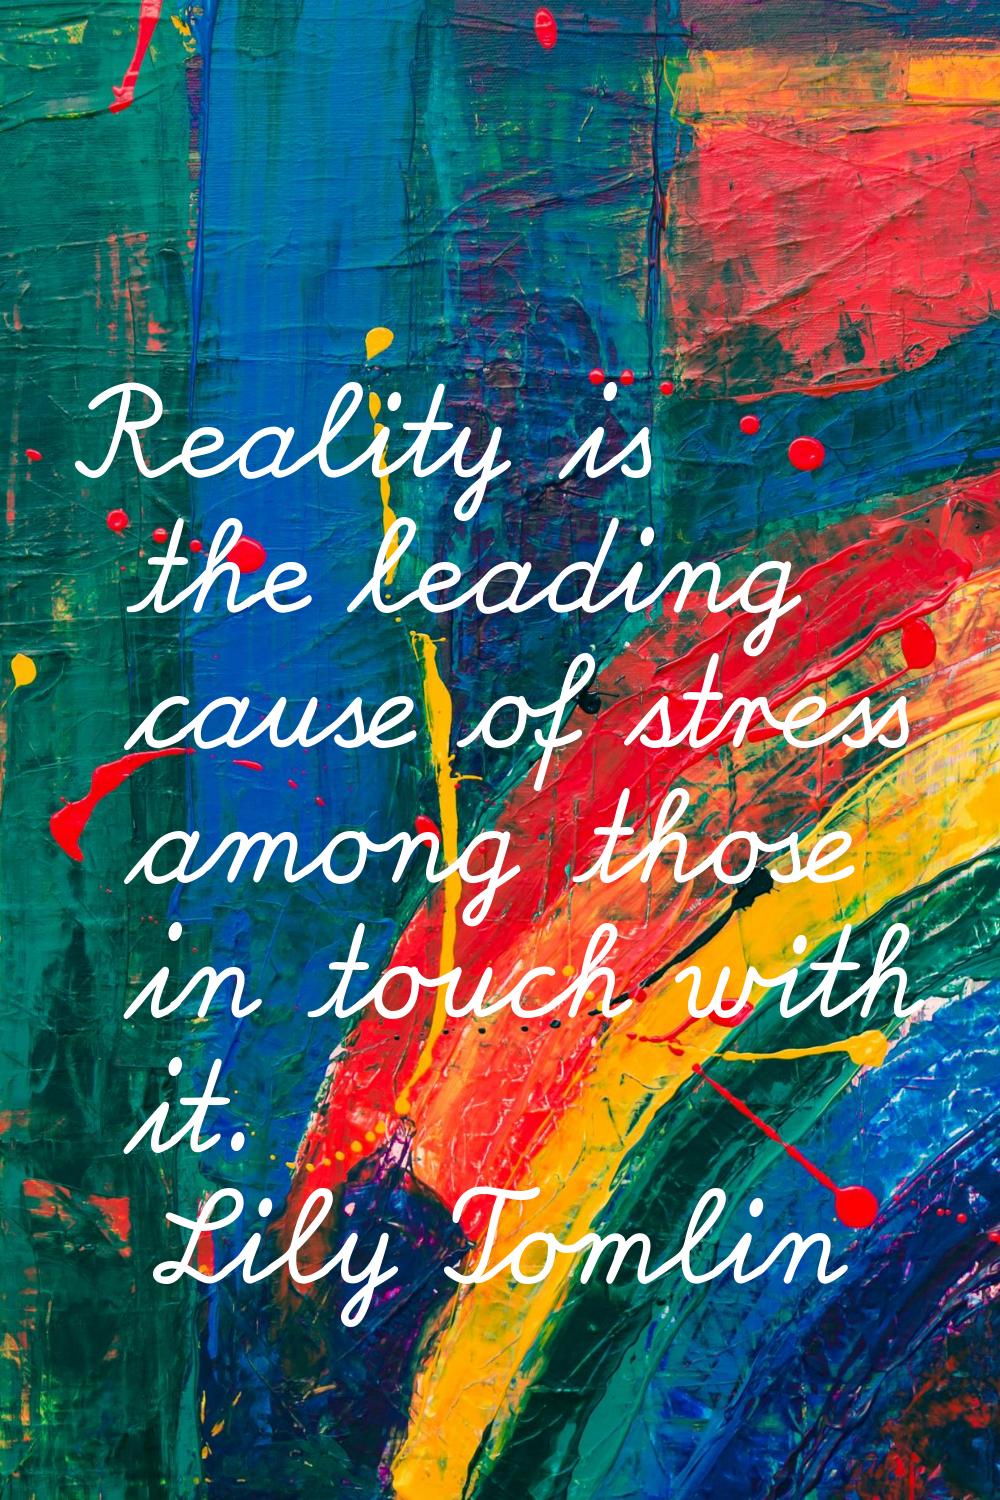 Reality is the leading cause of stress among those in touch with it.